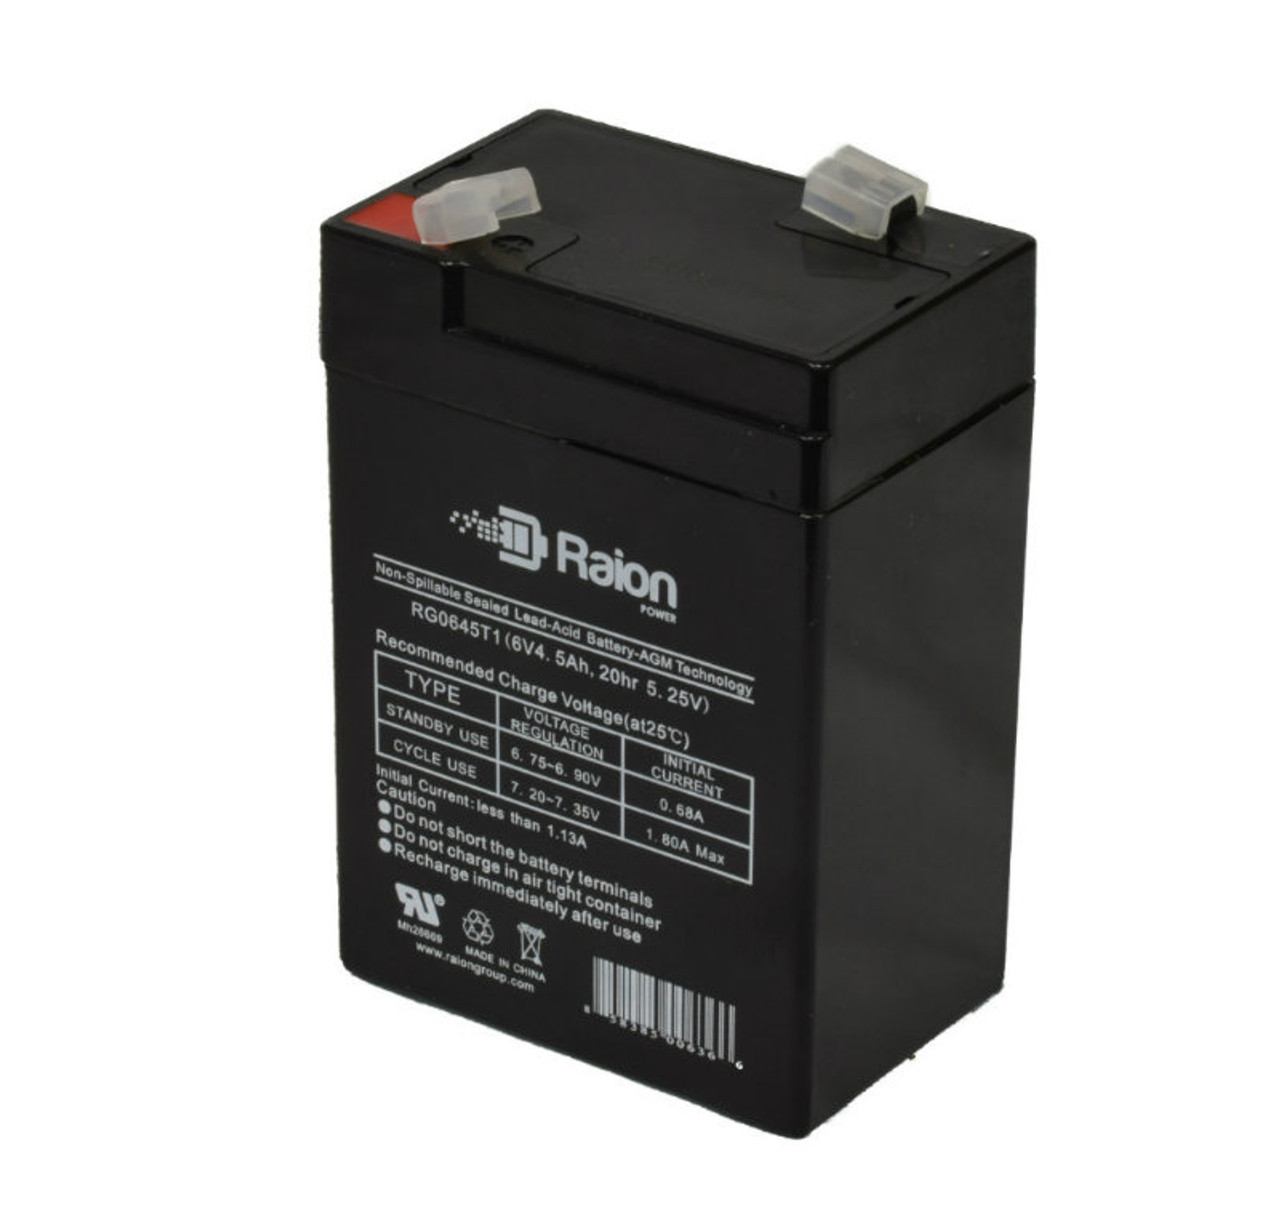 Raion Power RG0645T1 6V 4.5Ah Replacement Battery Cartridge for Interstate SLA0830